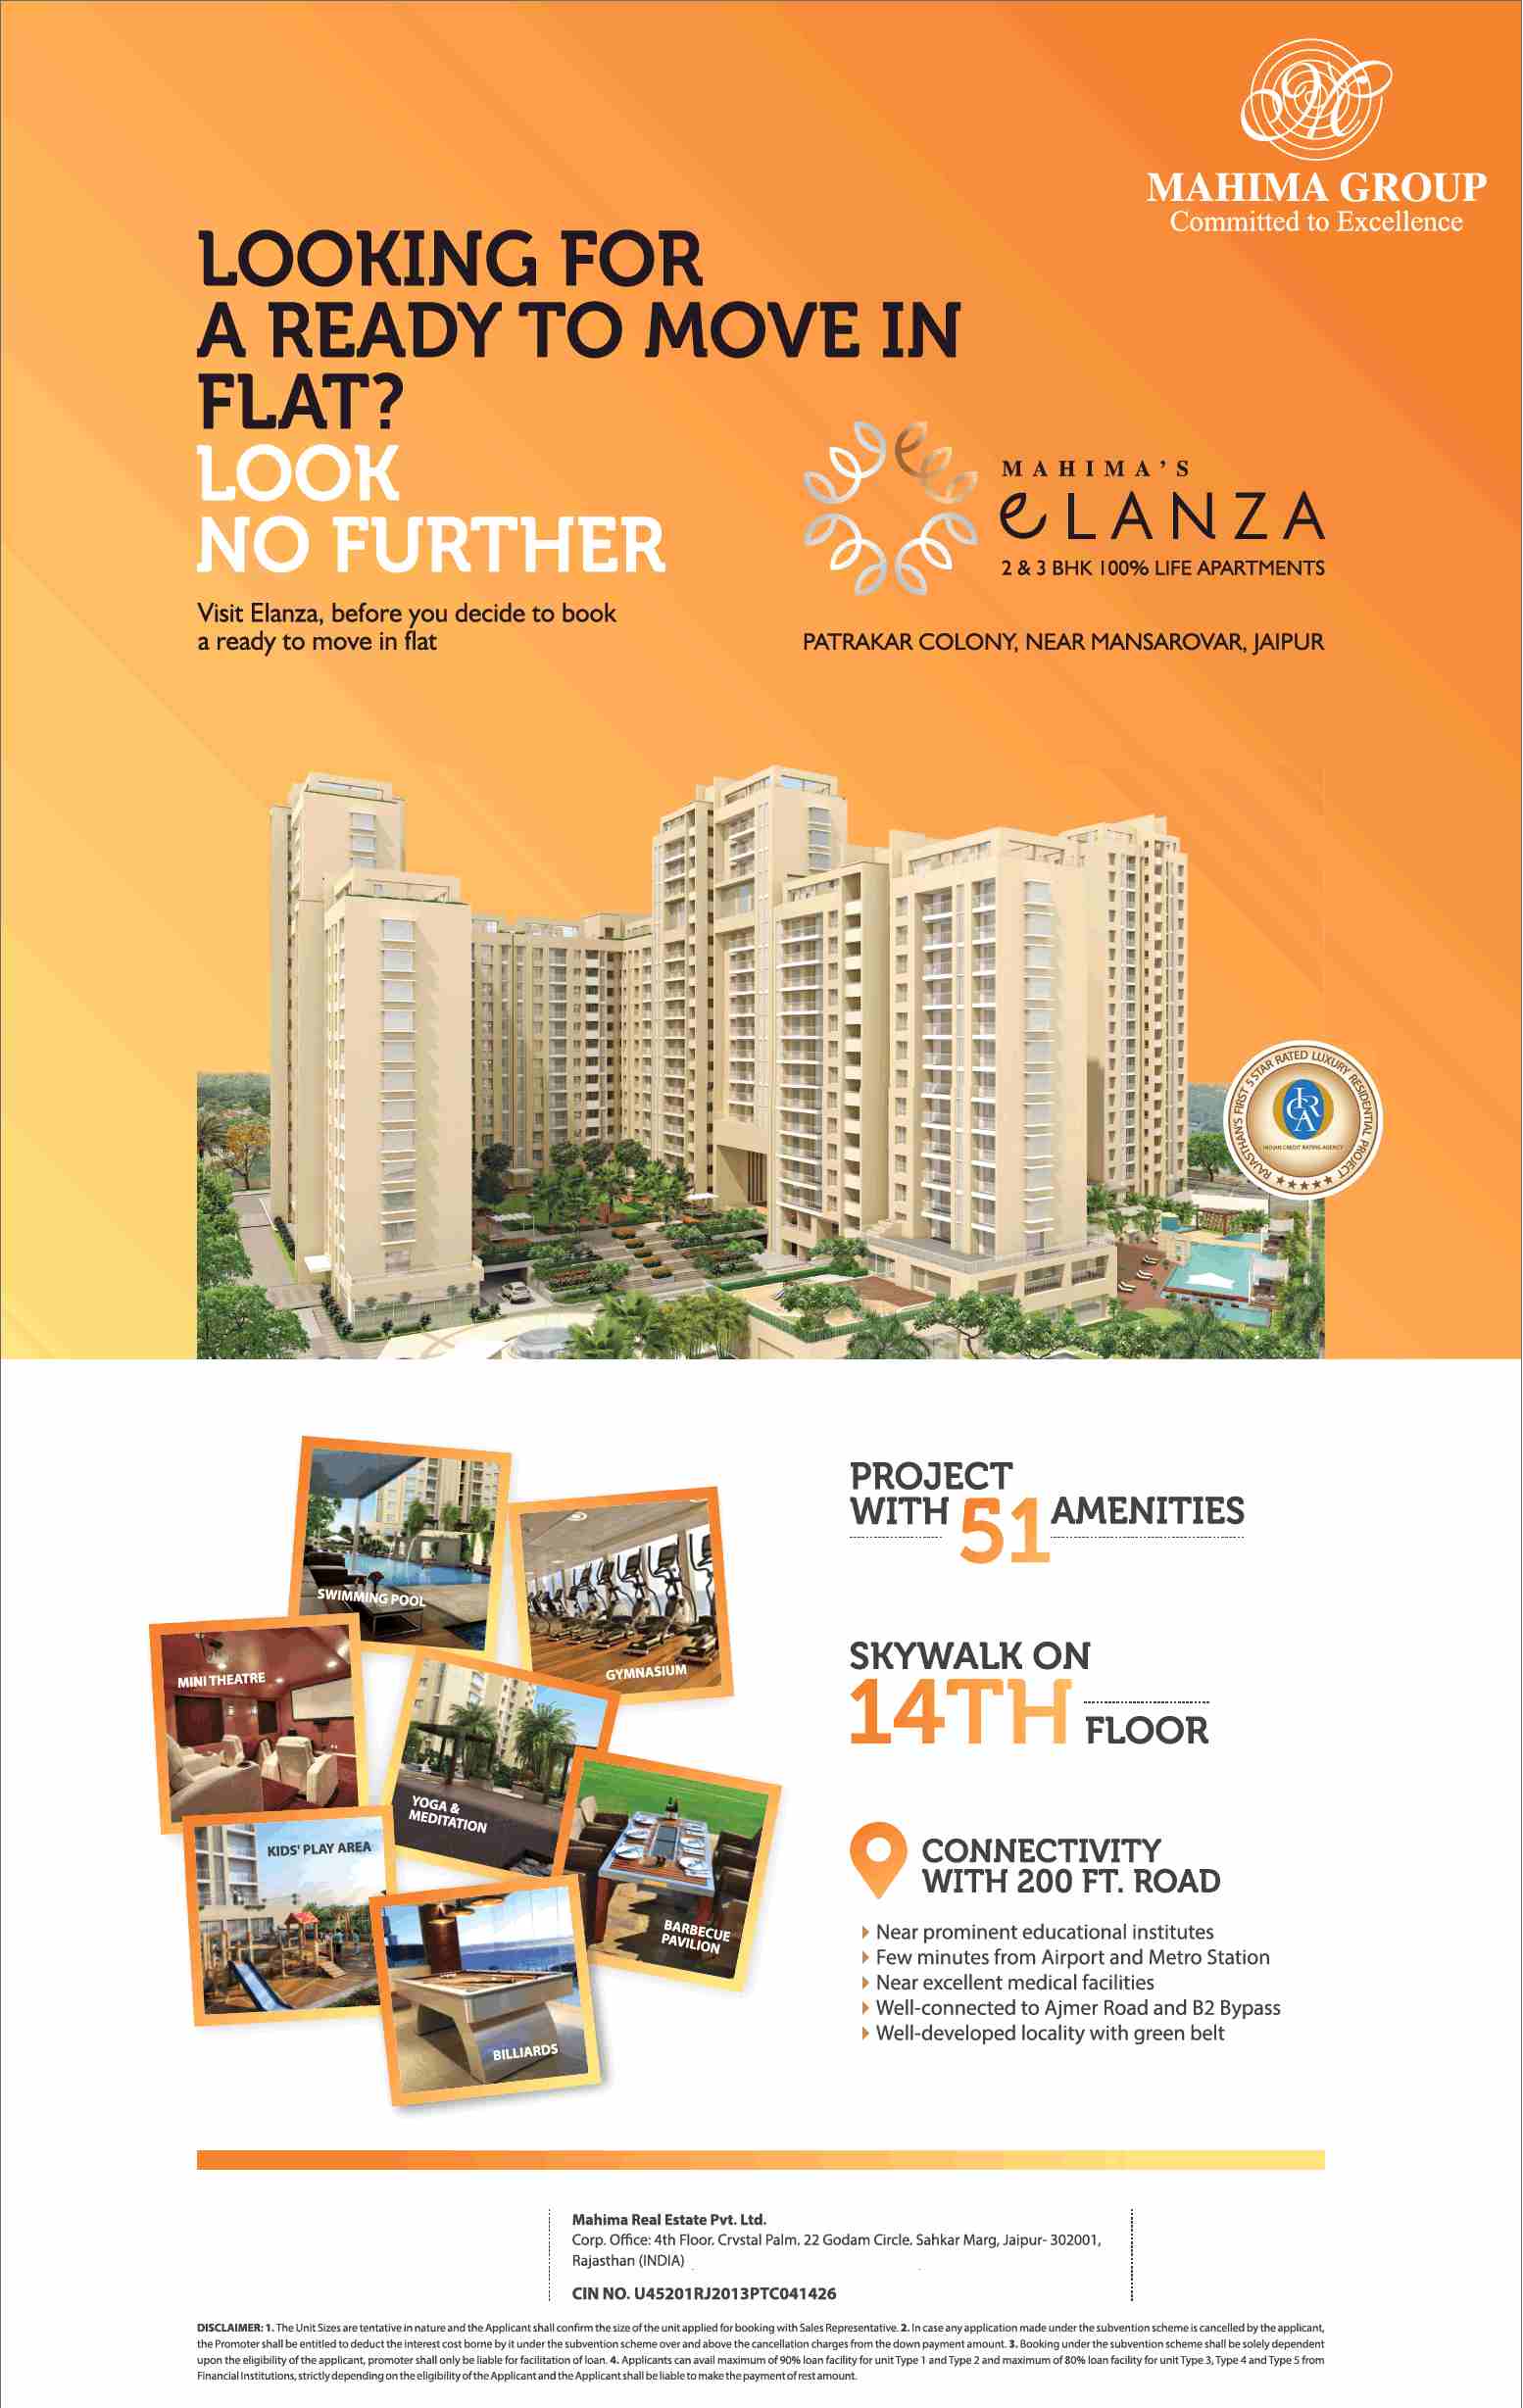 Book ready to move home with great amenities at Mahima Elanza in Jaipur Update